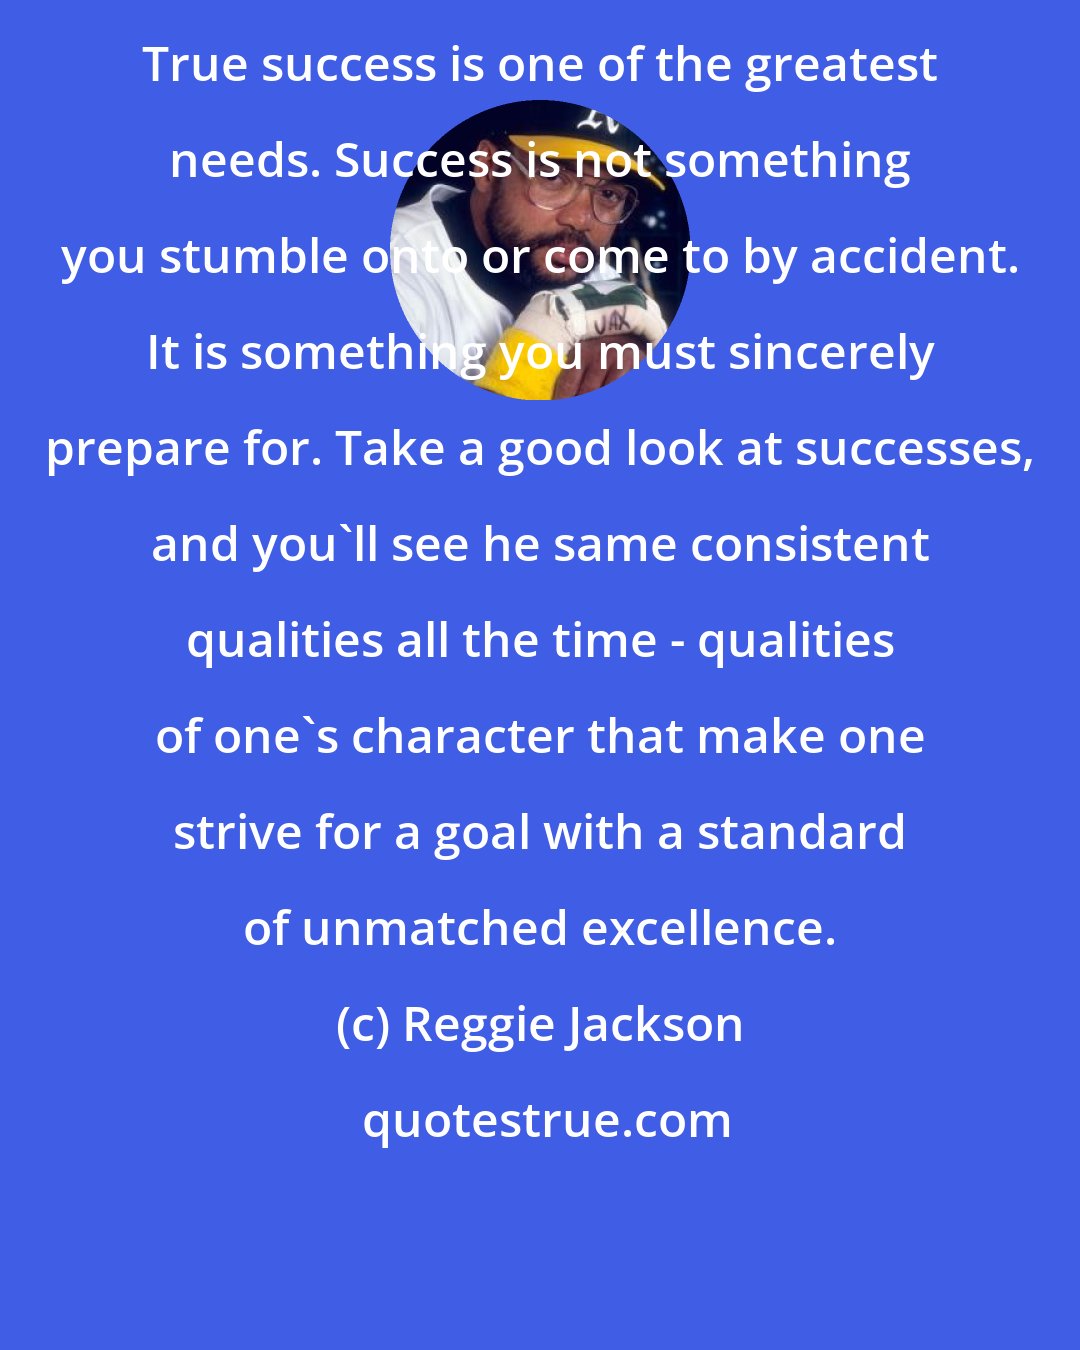 Reggie Jackson: True success is one of the greatest needs. Success is not something you stumble onto or come to by accident. It is something you must sincerely prepare for. Take a good look at successes, and you'll see he same consistent qualities all the time - qualities of one's character that make one strive for a goal with a standard of unmatched excellence.